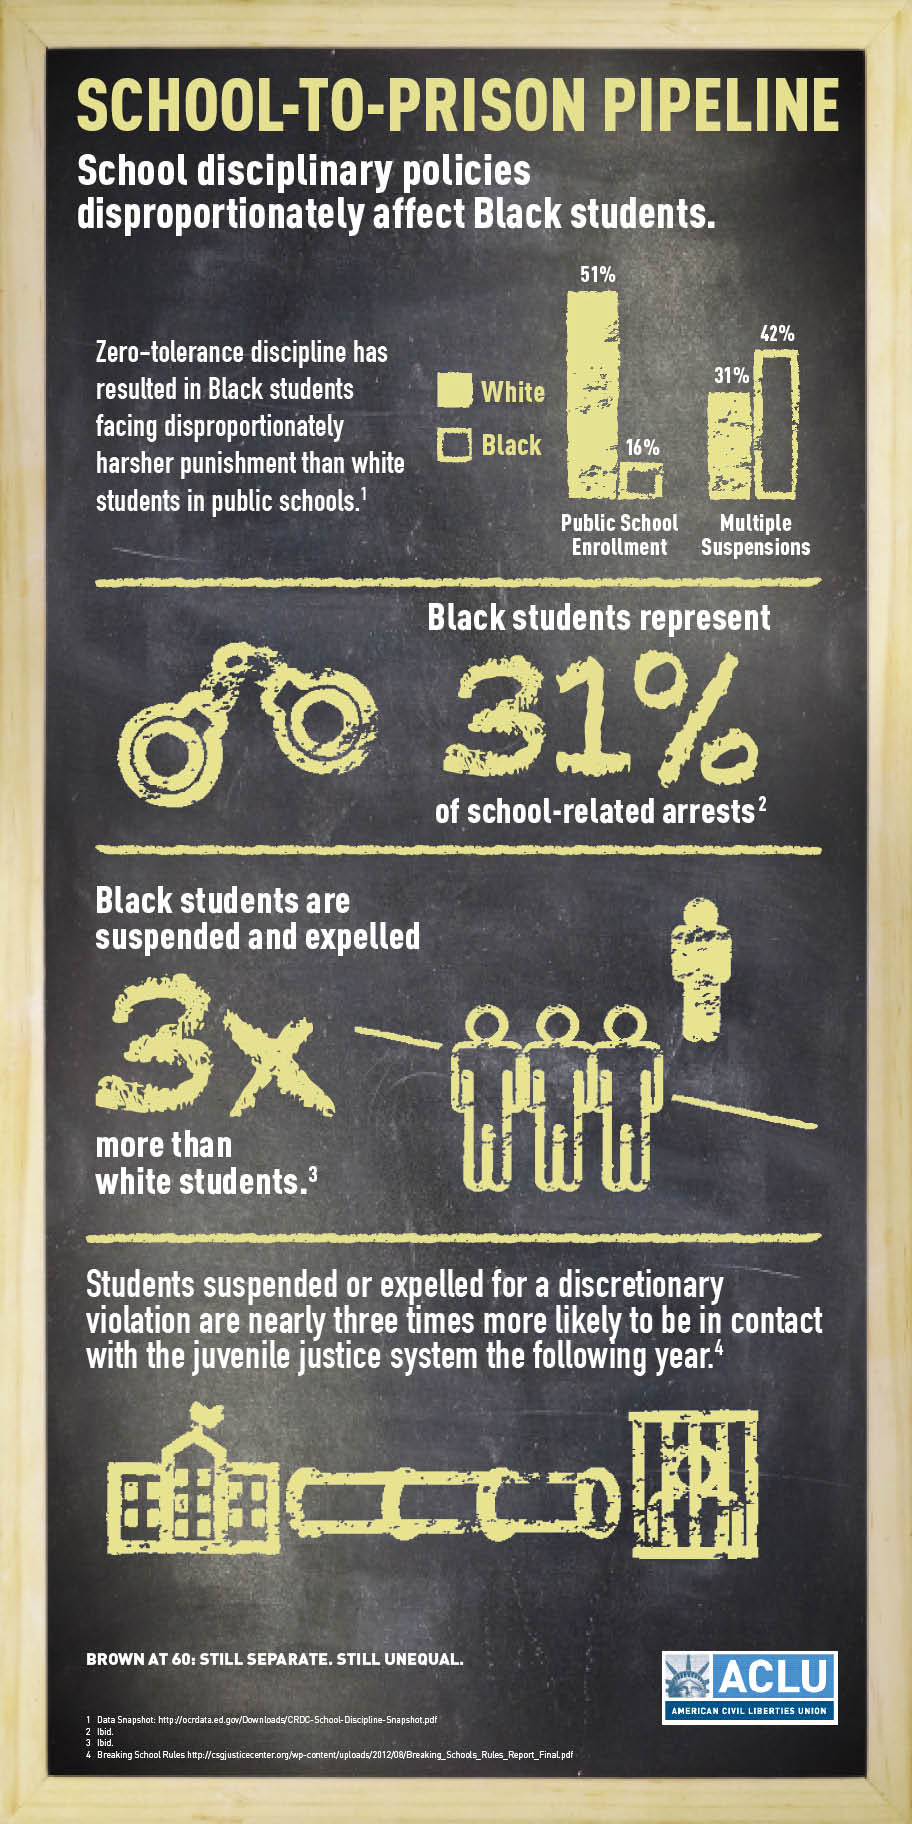 school-to-prison pipeline: school disciplinary policies disproportionately affect black students. Zero tolerance discipline has resulted in Black students facing disproportionately harsher punishment than white students in public schools. Black students represent 31 percent of school-related arrests. Black students are suspended and expelled three times more than white students. Students suspended or expelled for a discretionary violation are nearly three times more likely to be in contact with the juvenile justice system the following year. 